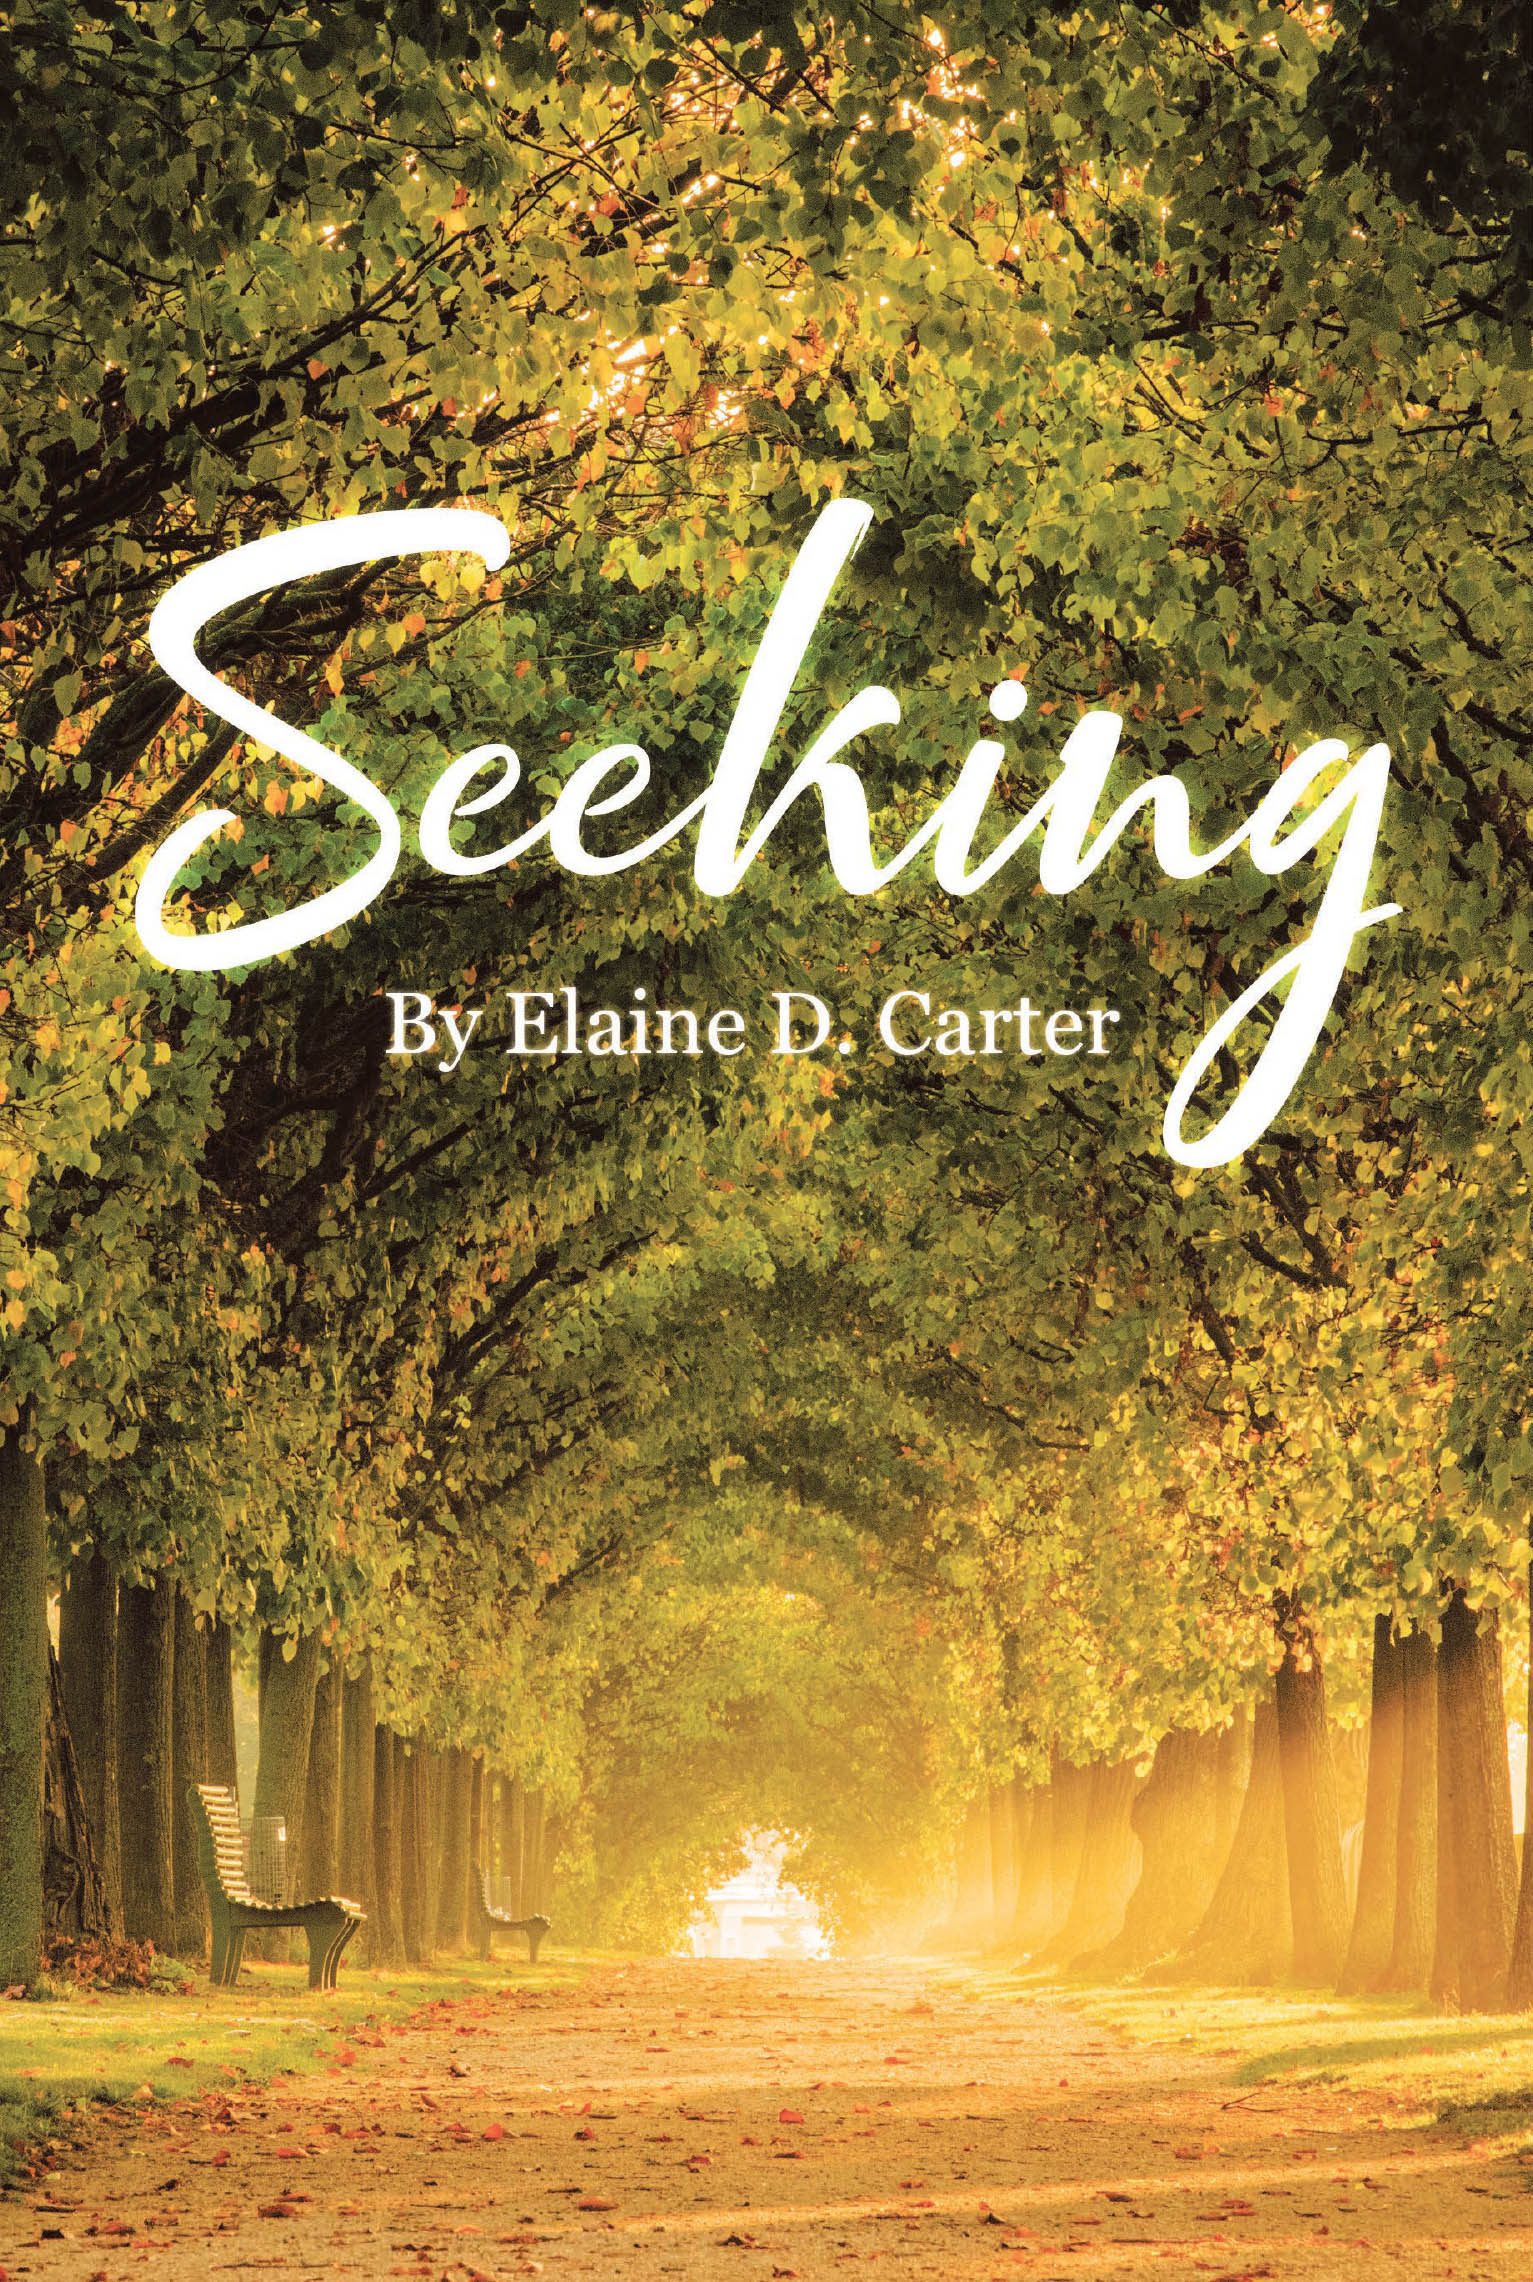 Author Elaine D. Carter’s New Book, "Seeking," is a Compelling Novel That Follows the Lives of Two Individuals Searching for Happiness and, Ultimately, Love